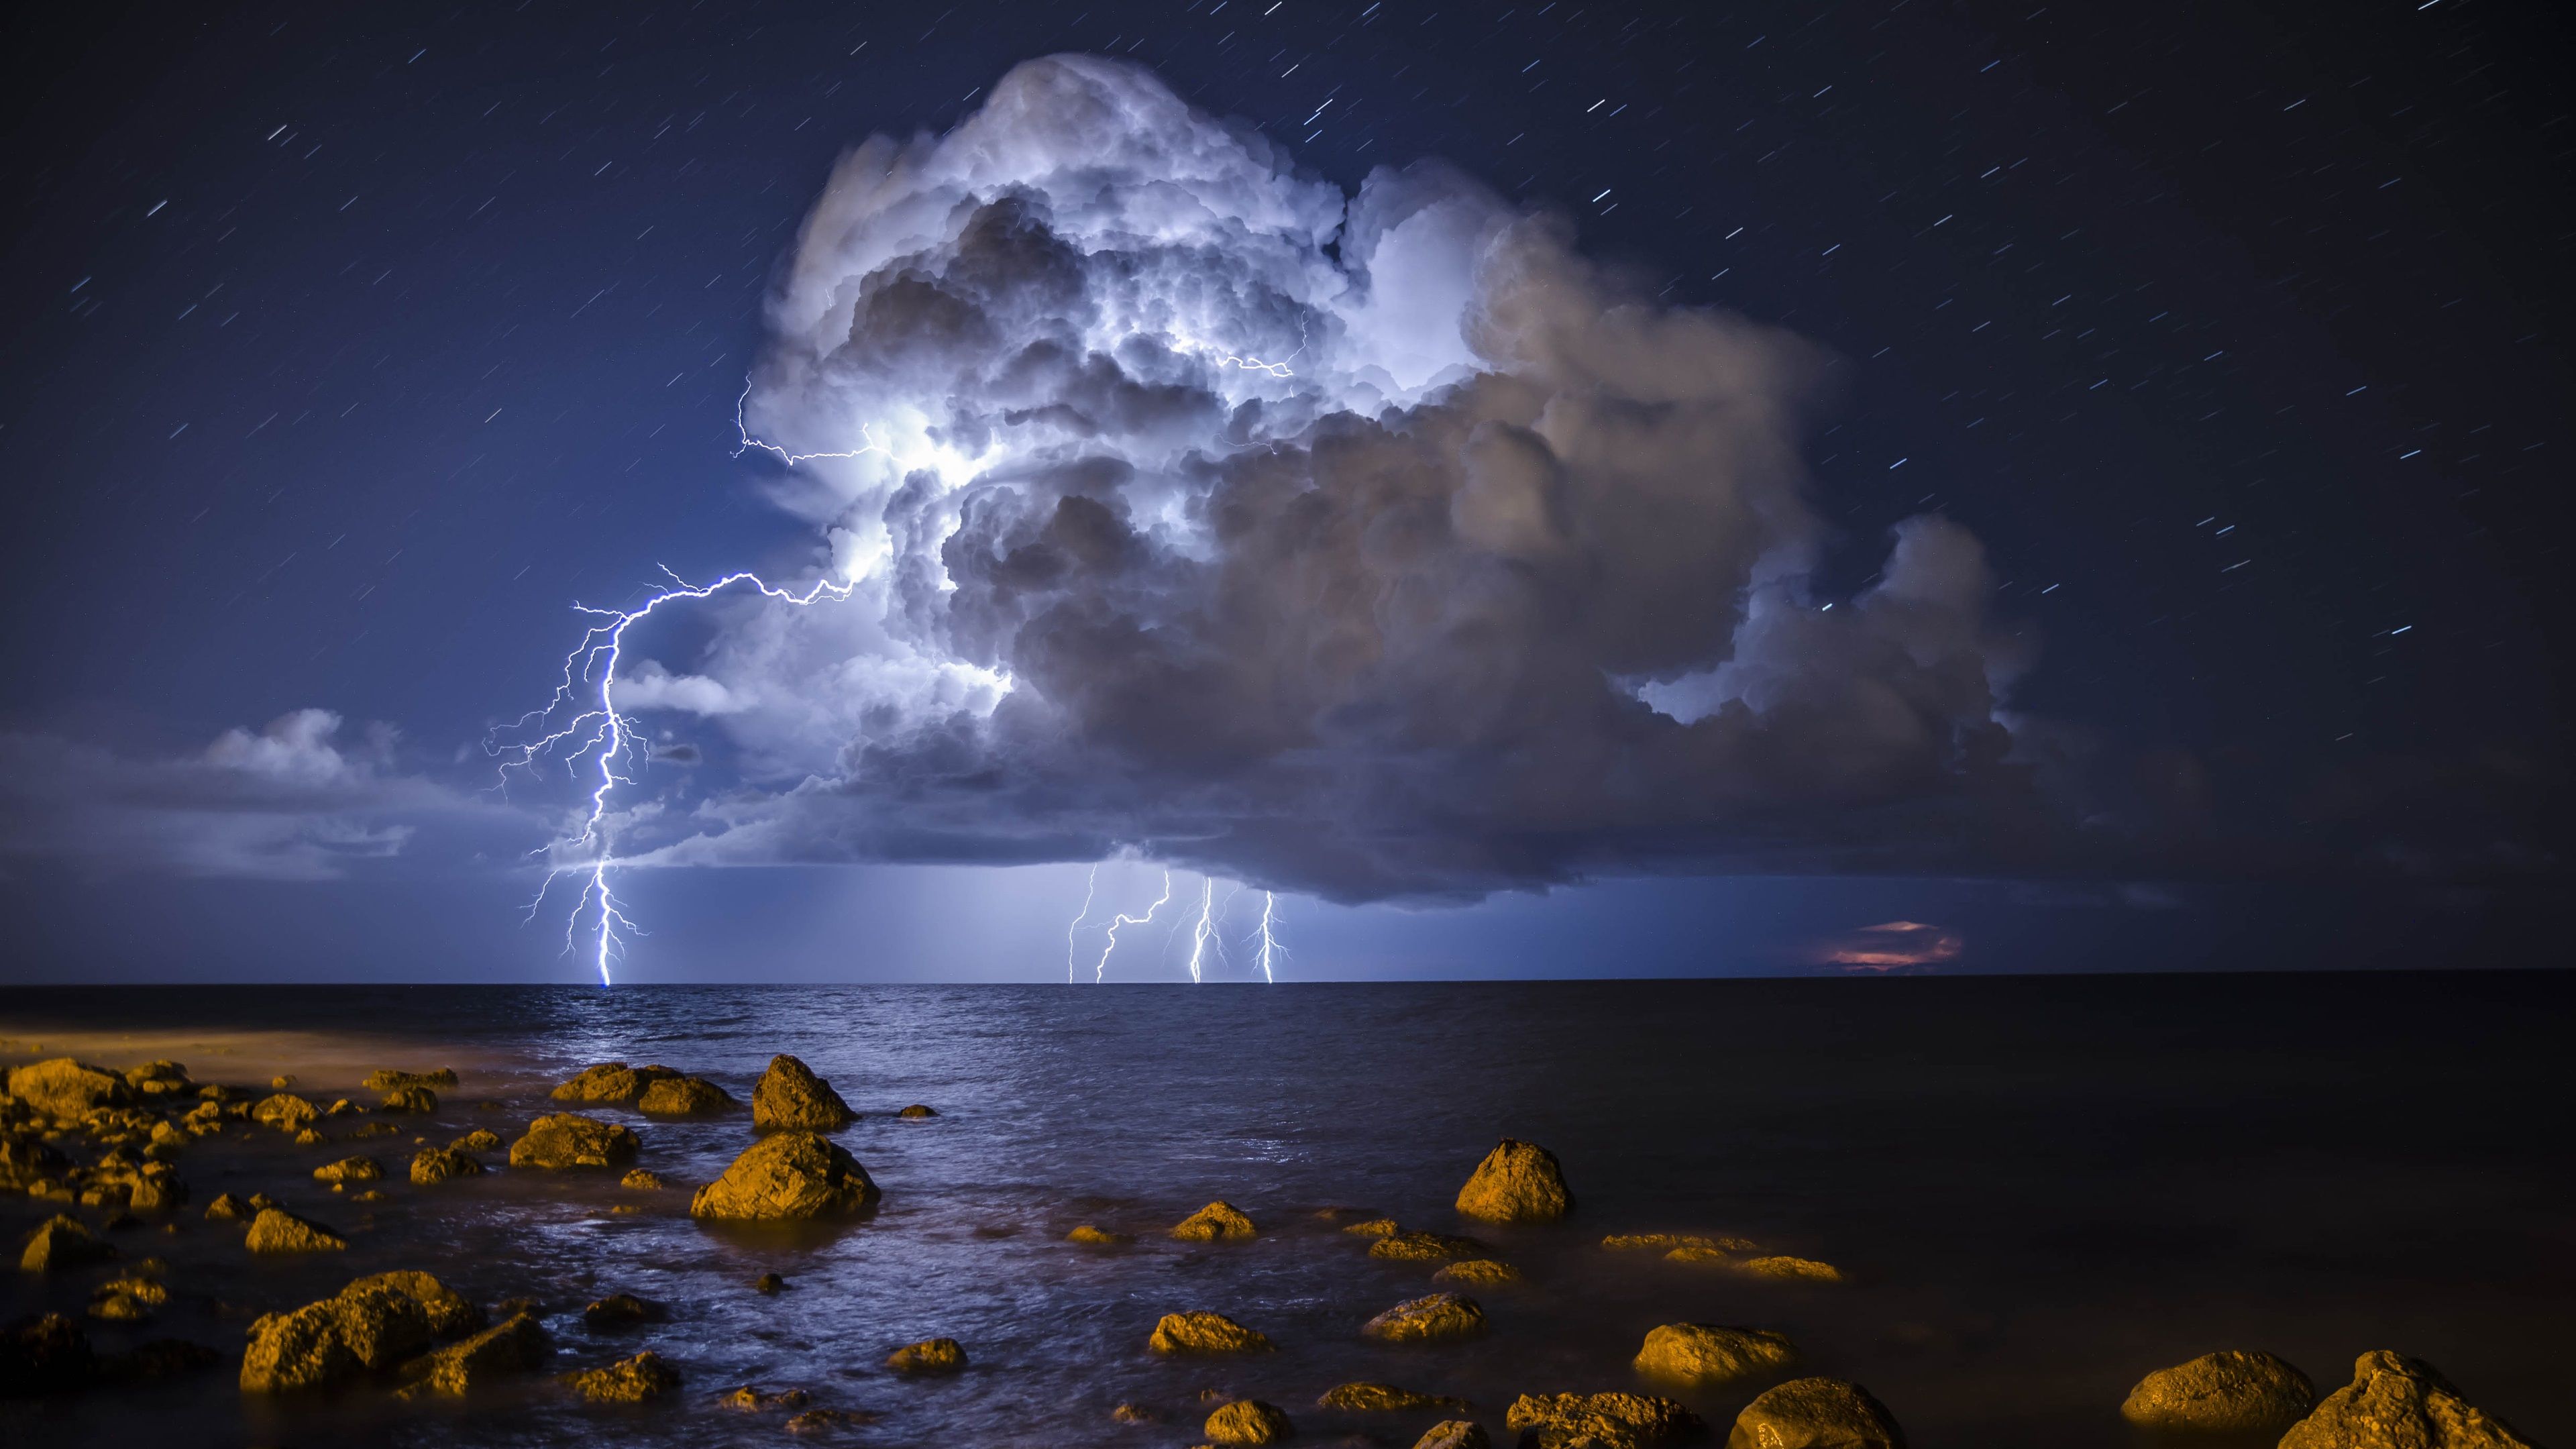 Wallpapers Storm, lightning, sea, stones 3840x2160 UHD 4K Picture, Image.